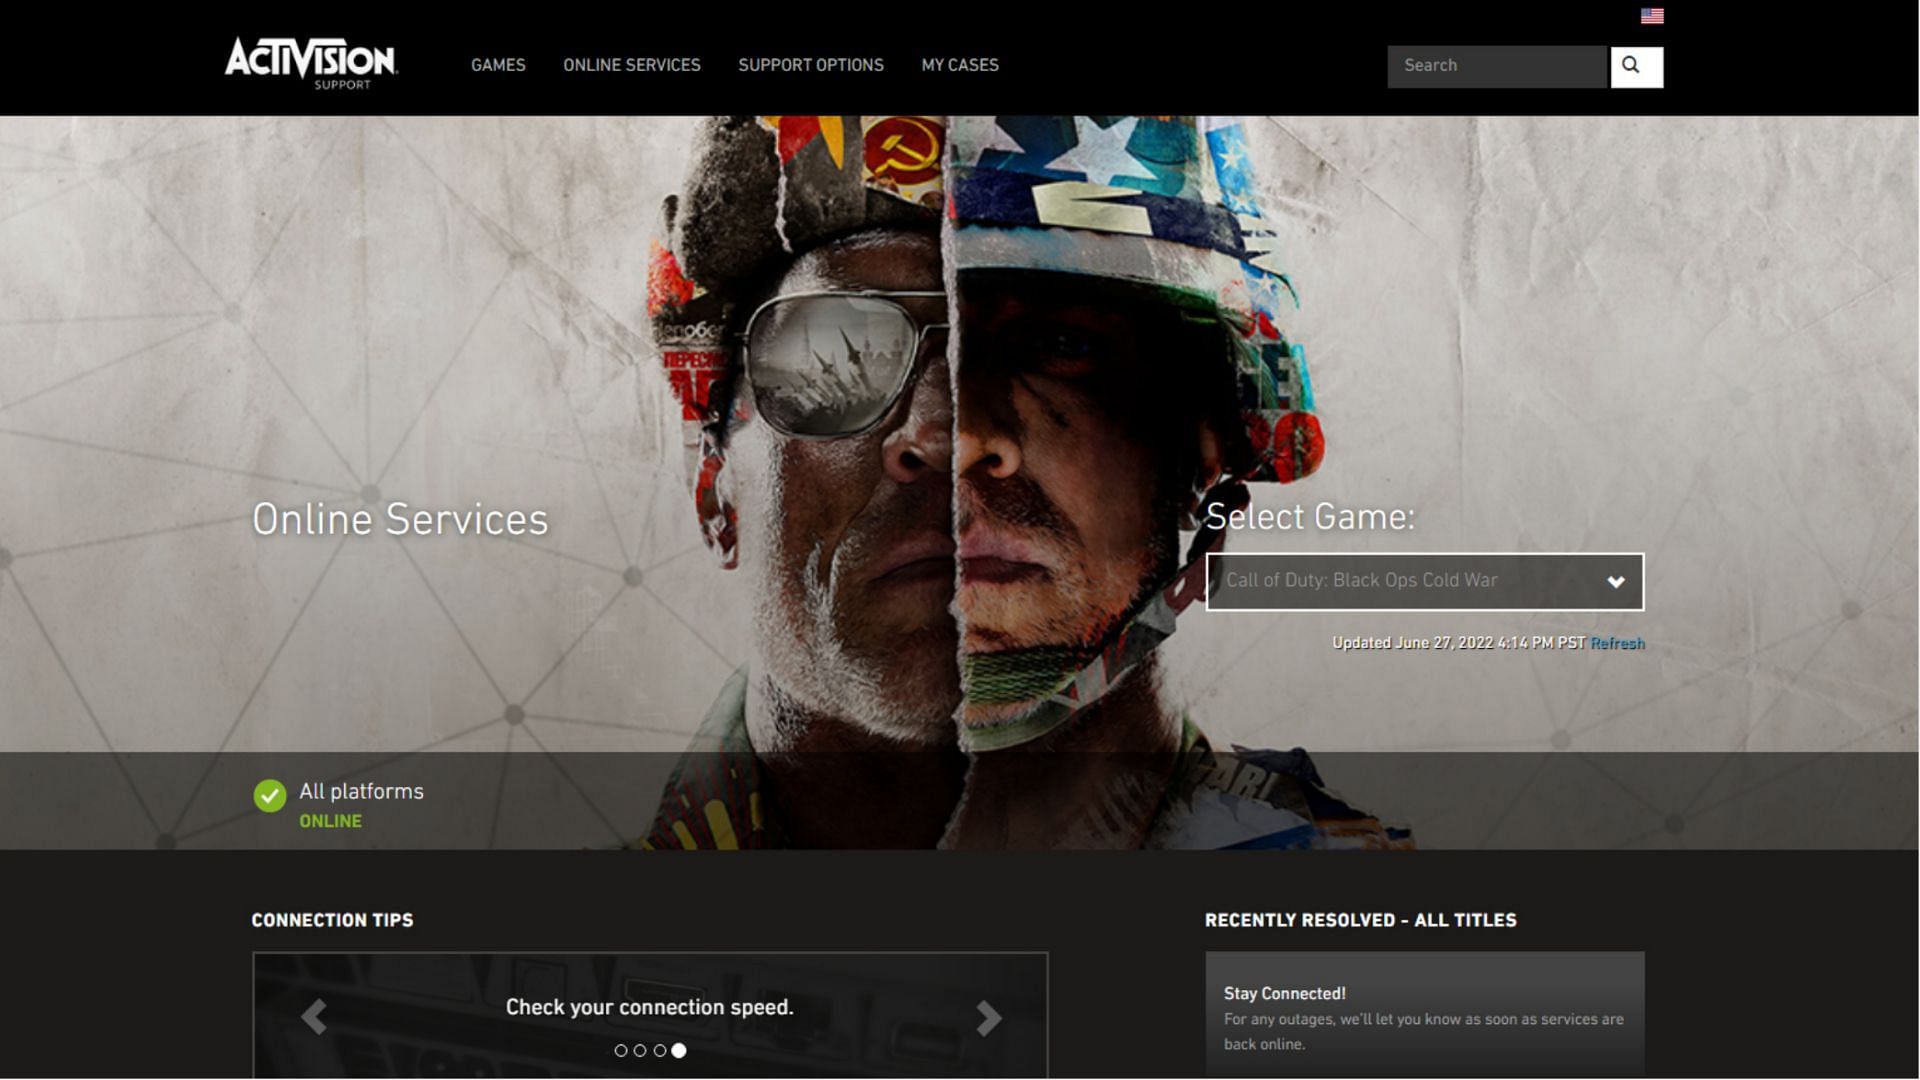 The Online Services support page for Black Ops Cold War (Image via Activision)